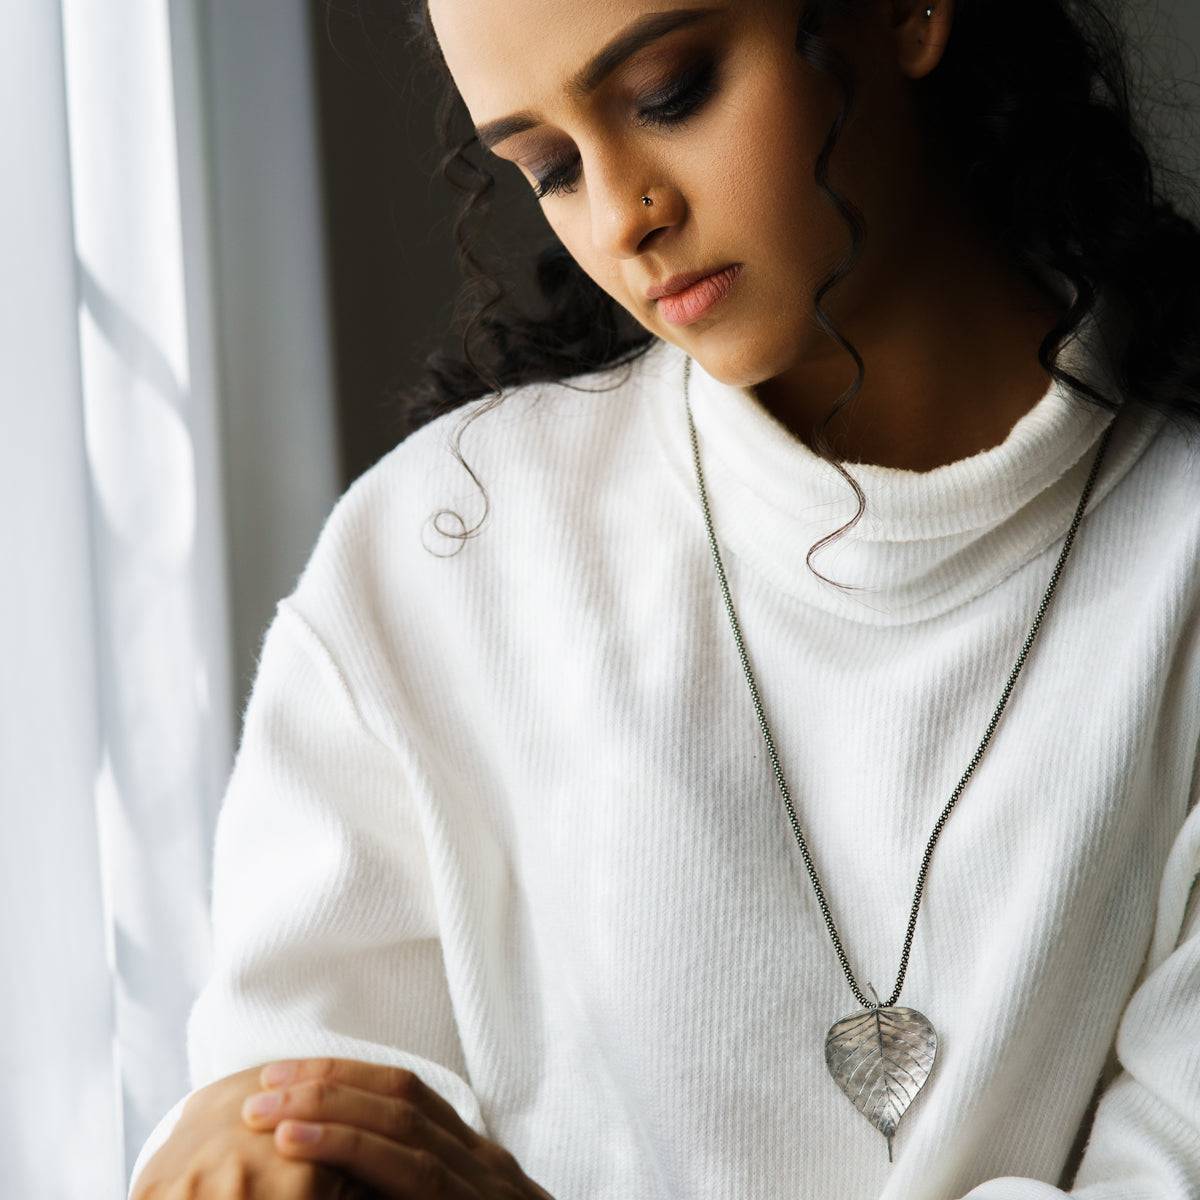 a woman wearing a white sweater and holding a cell phone